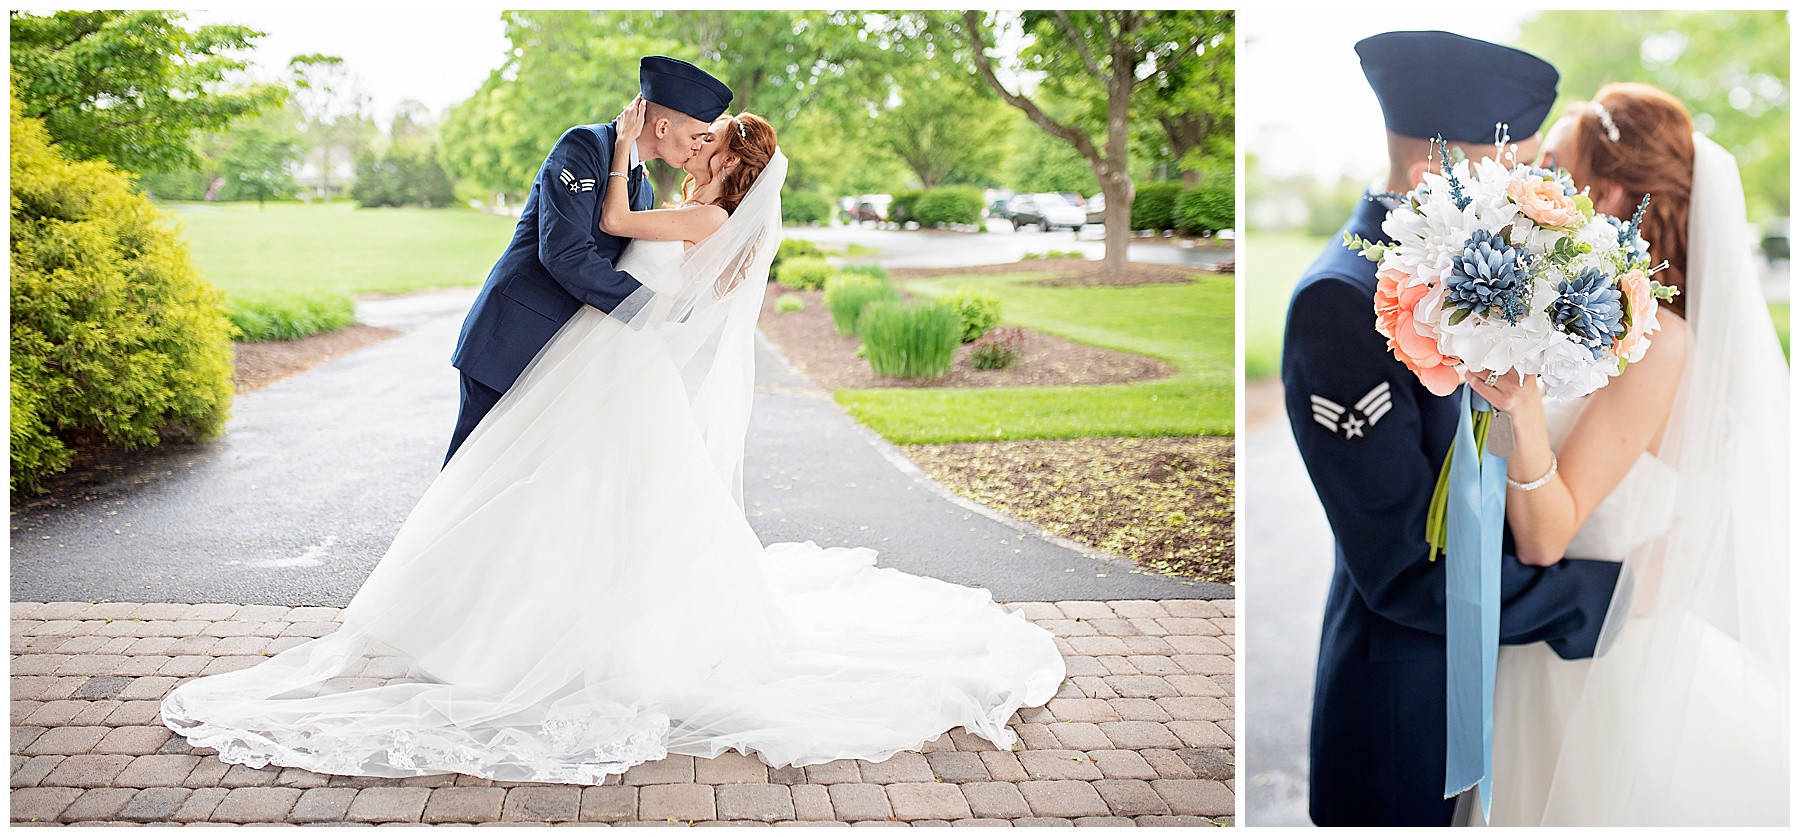 Rainy Day Wedding Portraits at the Outdoor Country Club